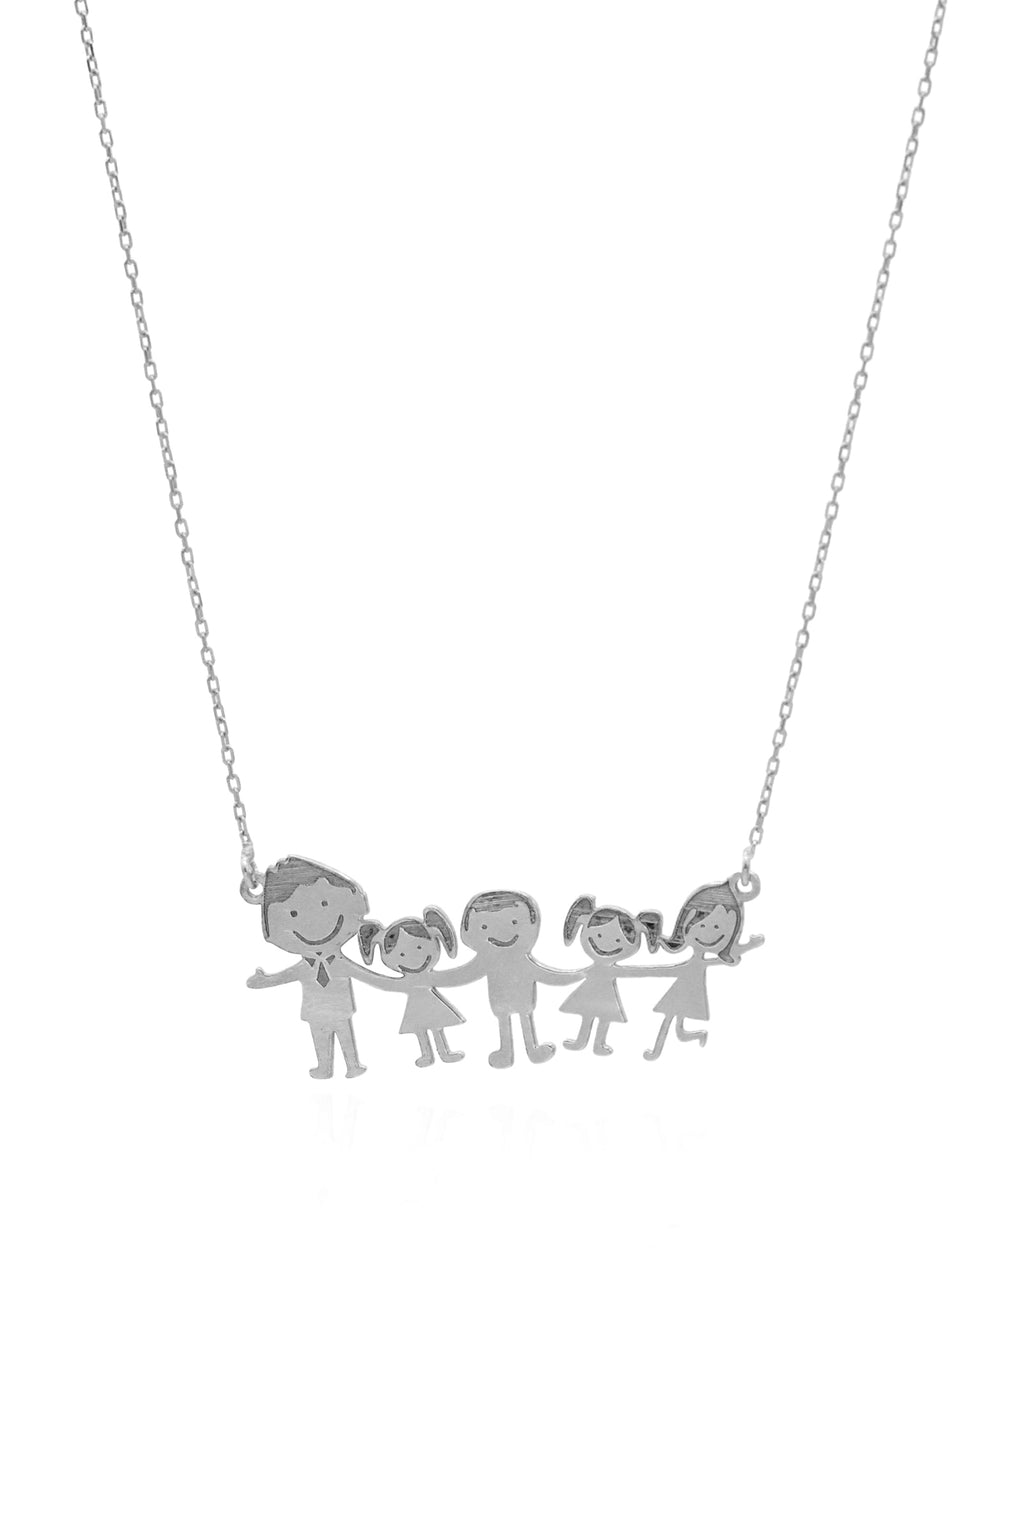 Family Model Handmade Silver Necklace (NG201019594)